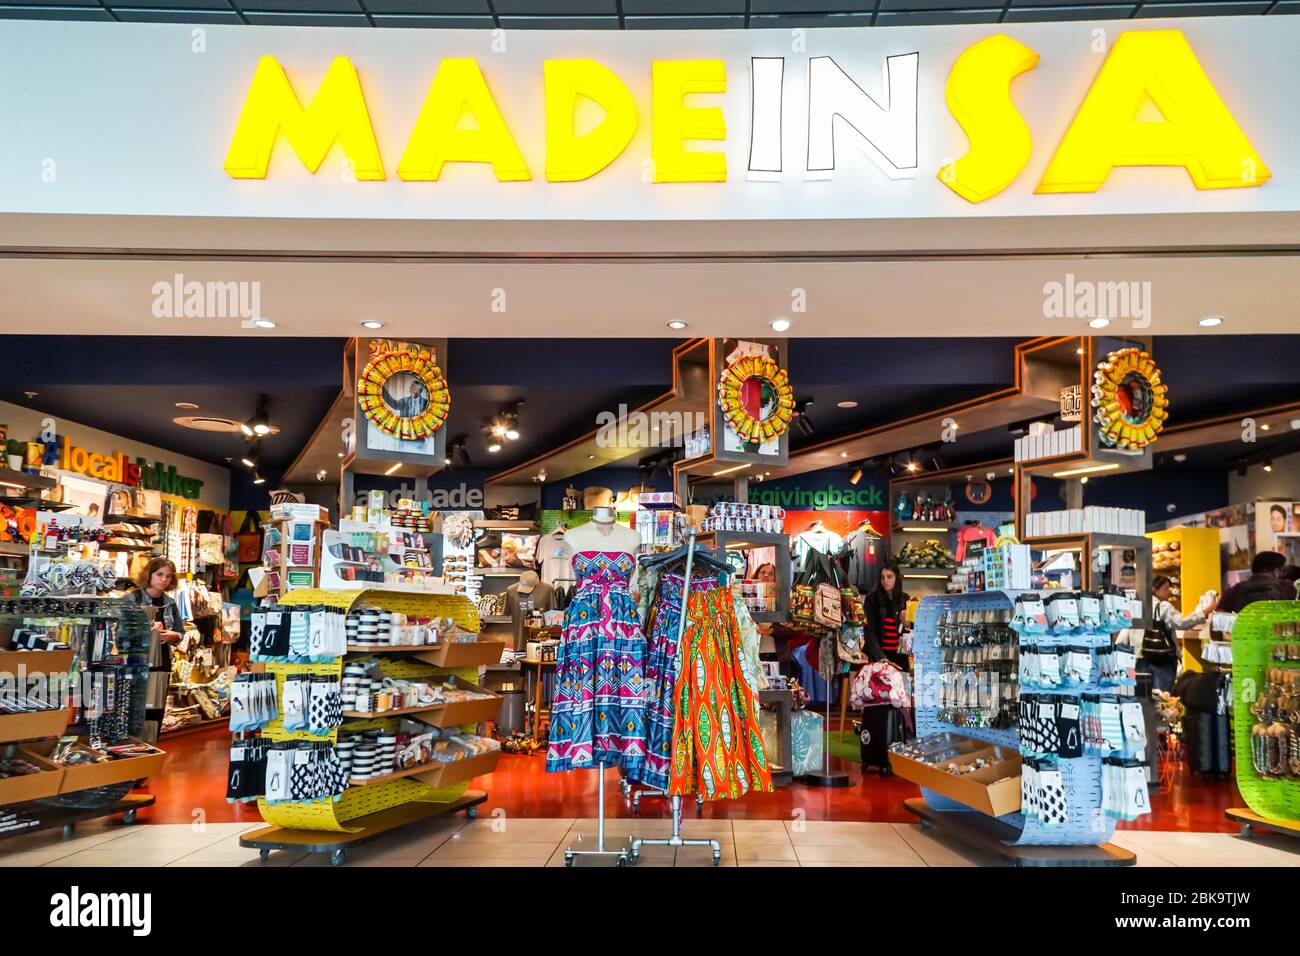 shoppers, people browsing in an airport store, shop for gifts, curios, mementos, souvenirs at Cape Town International airport, South Africa Stock Photo